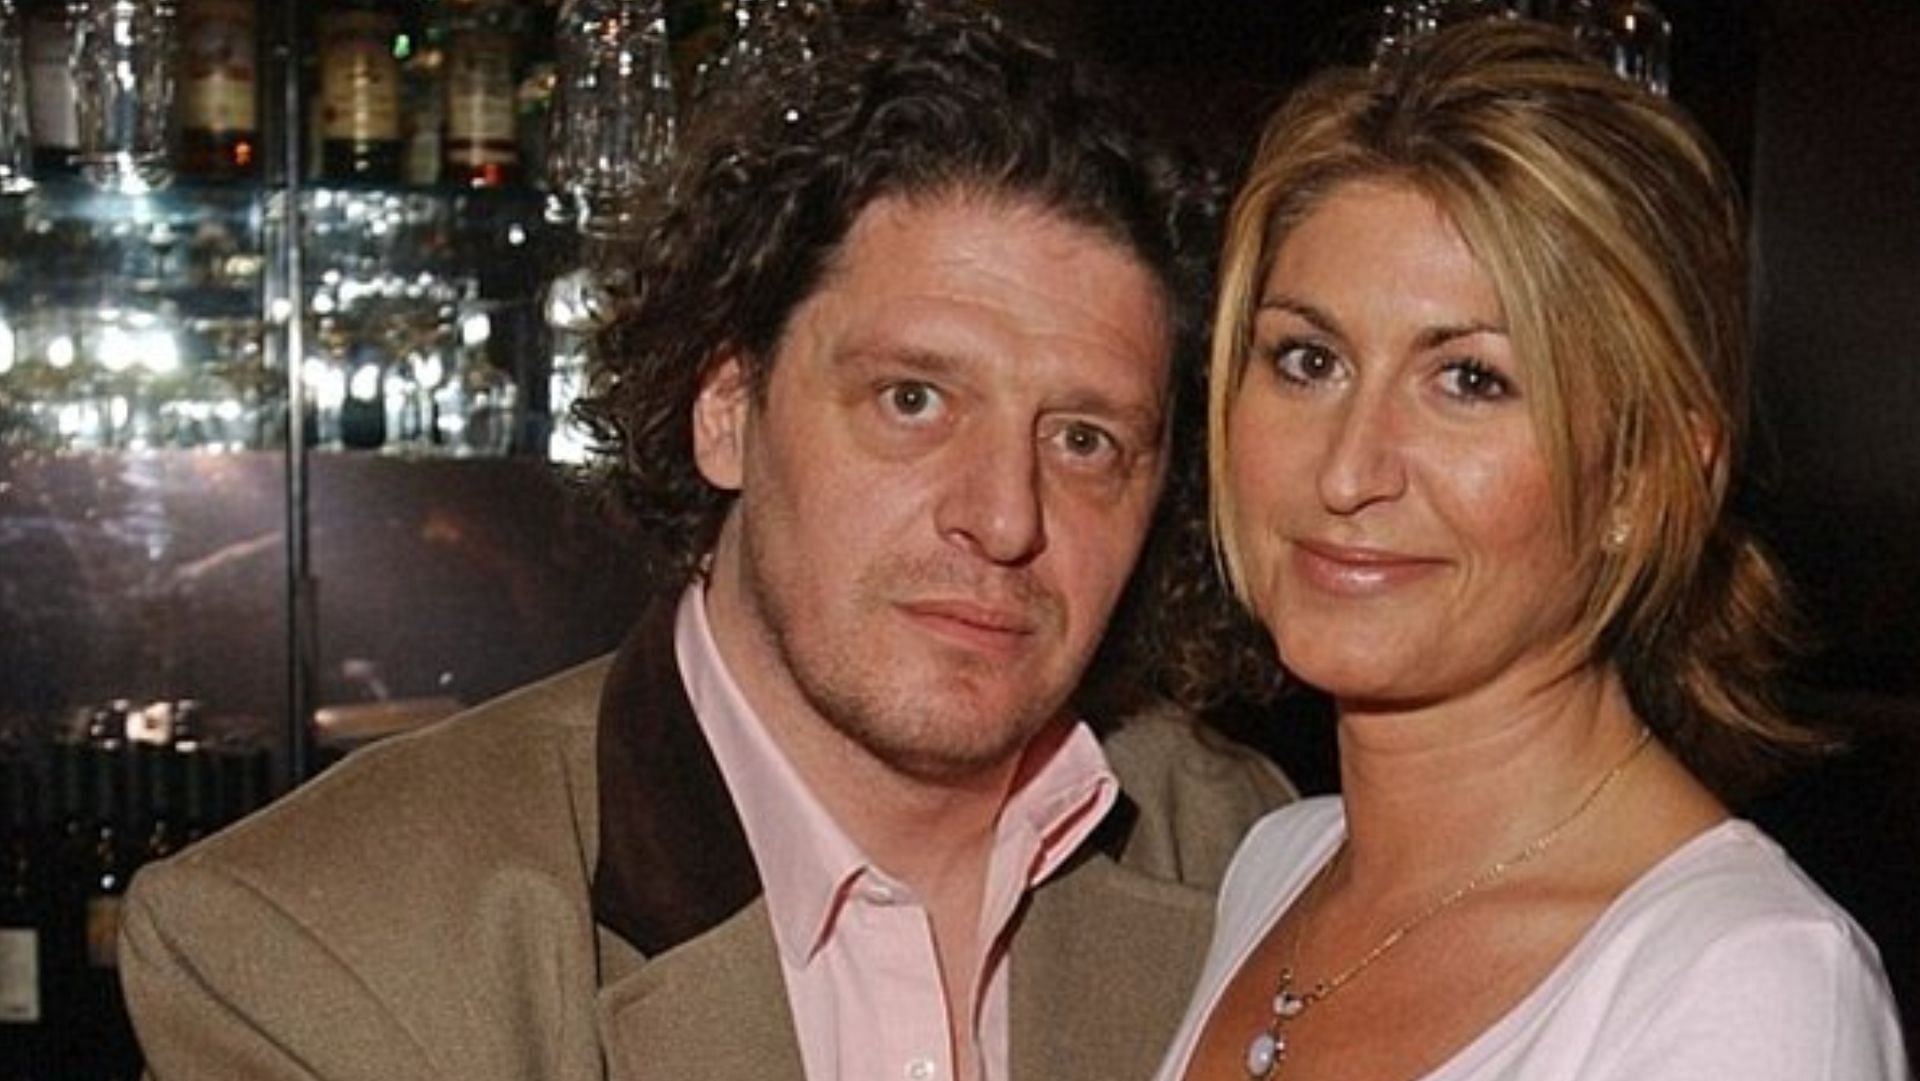 Marco Pierre White&#039;s son has been sentenced to 18 months in prison. (Image via @DerangedRadio/Twitter)